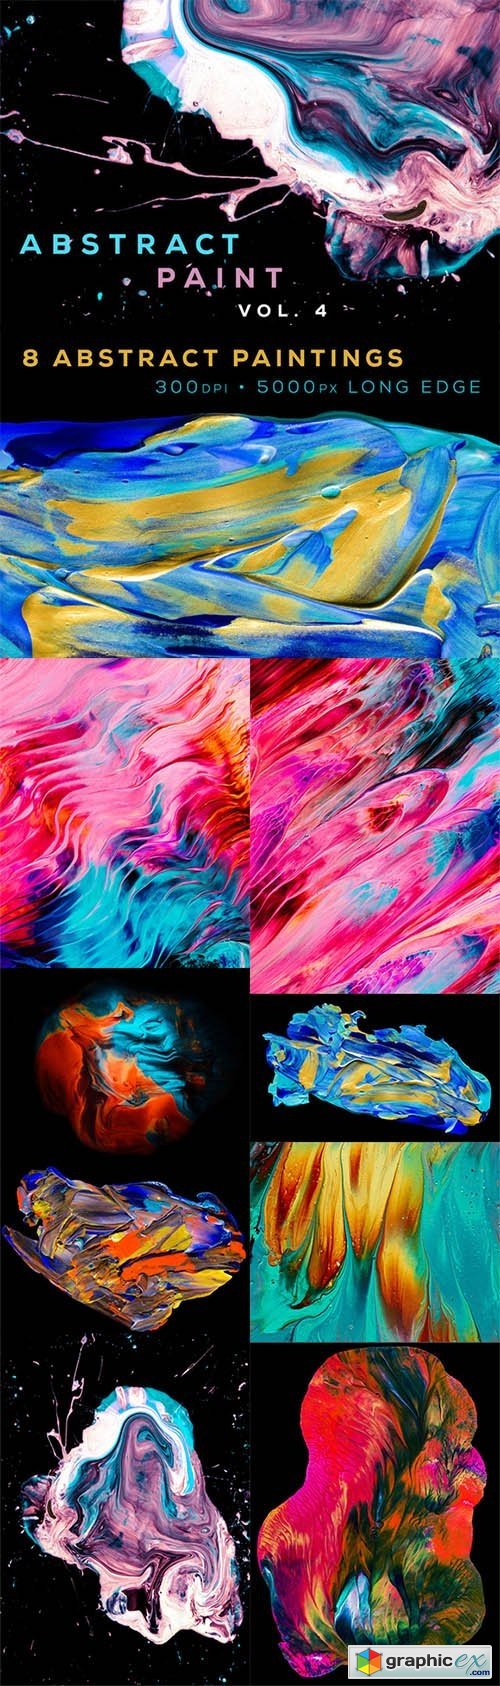 Abstract Paint, Vol 4